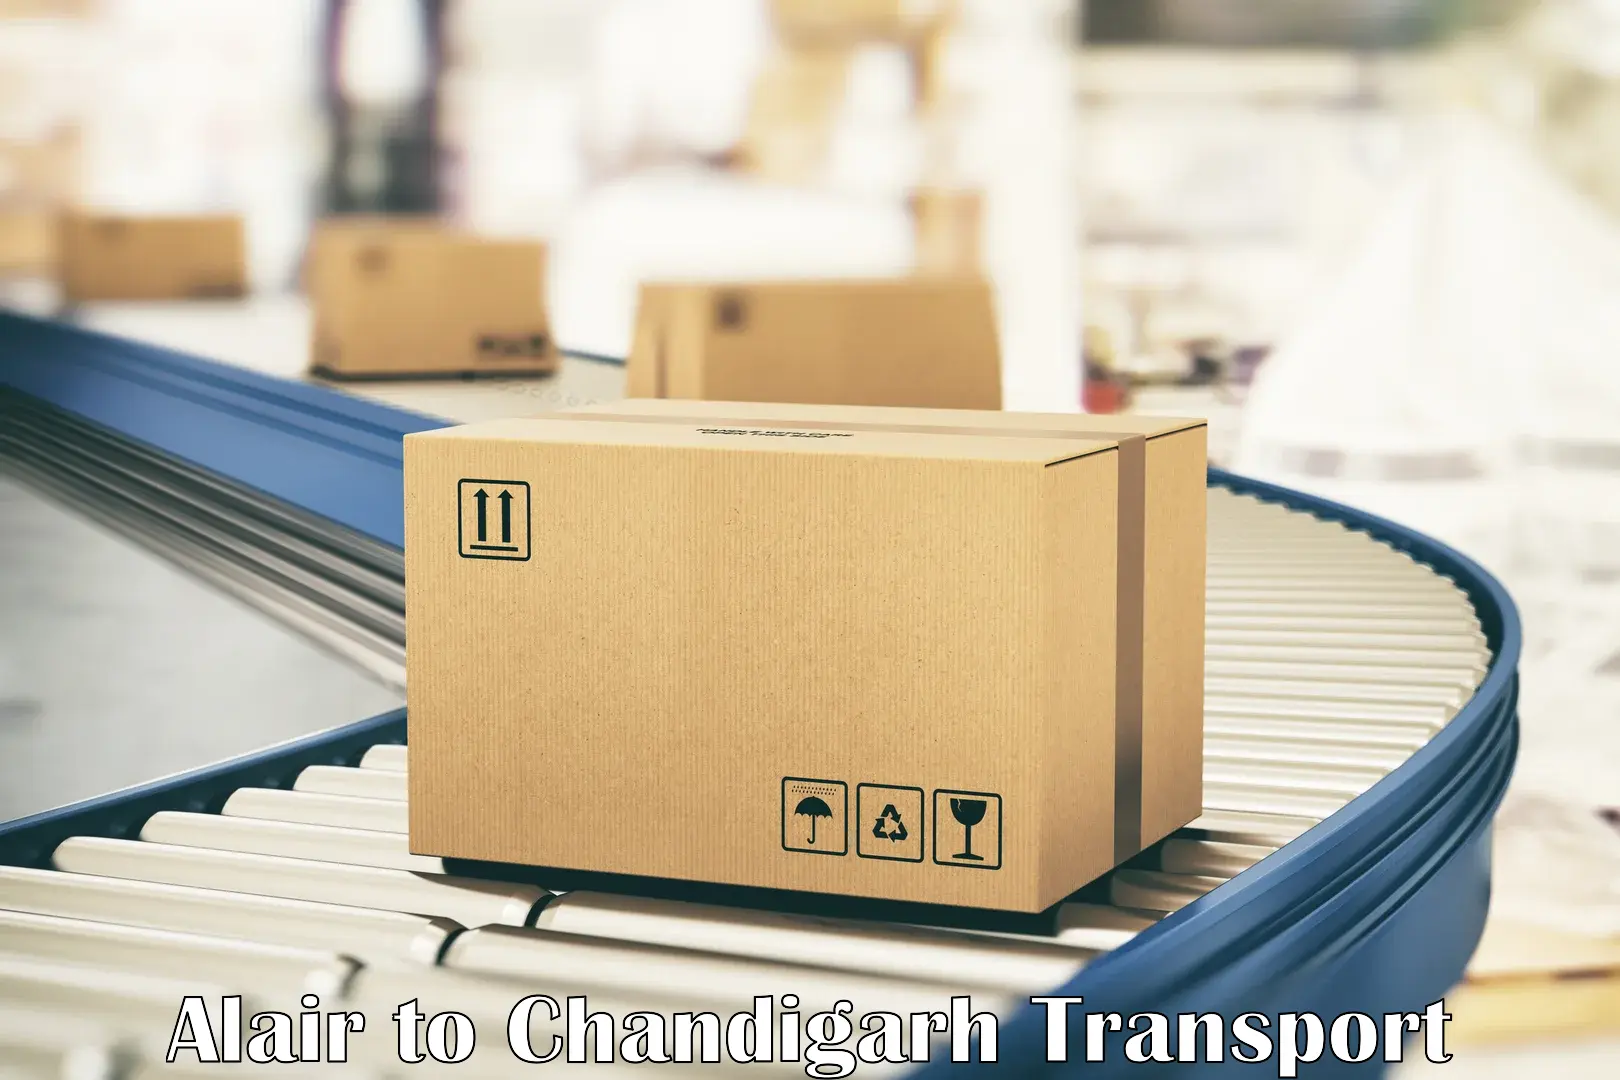 Two wheeler parcel service Alair to Chandigarh